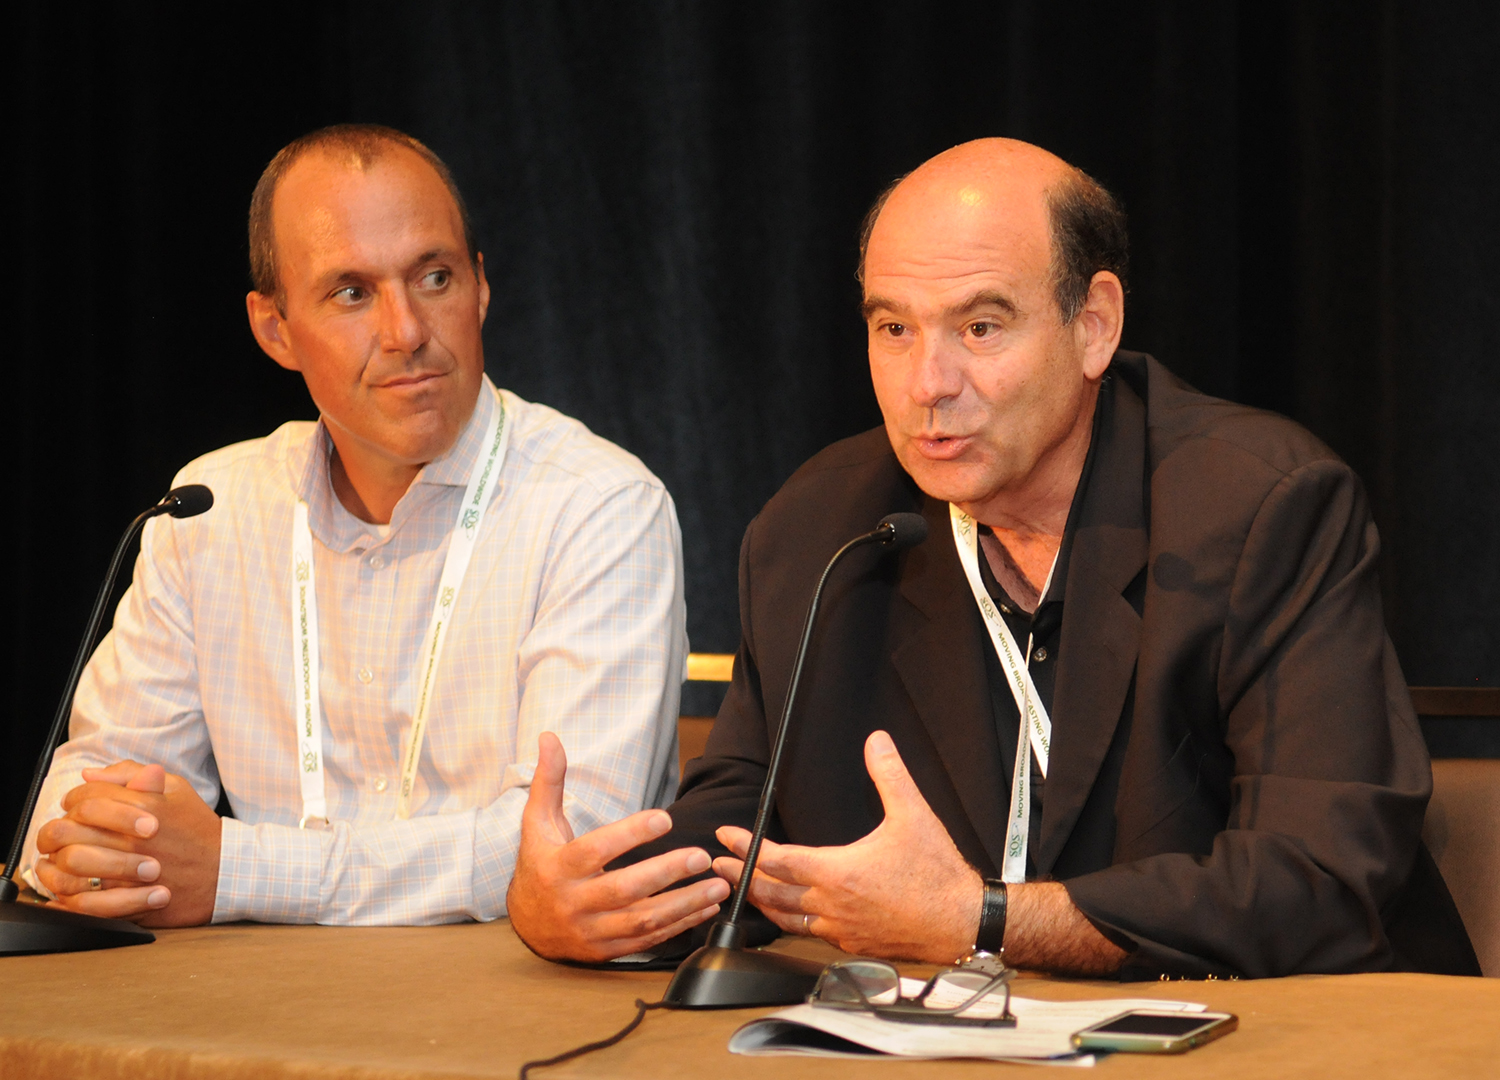 From left: Brian Campanotti, Oracle, Global Director of Business Development and Jeff Greenwald, HGST, Senior Director, Market Development